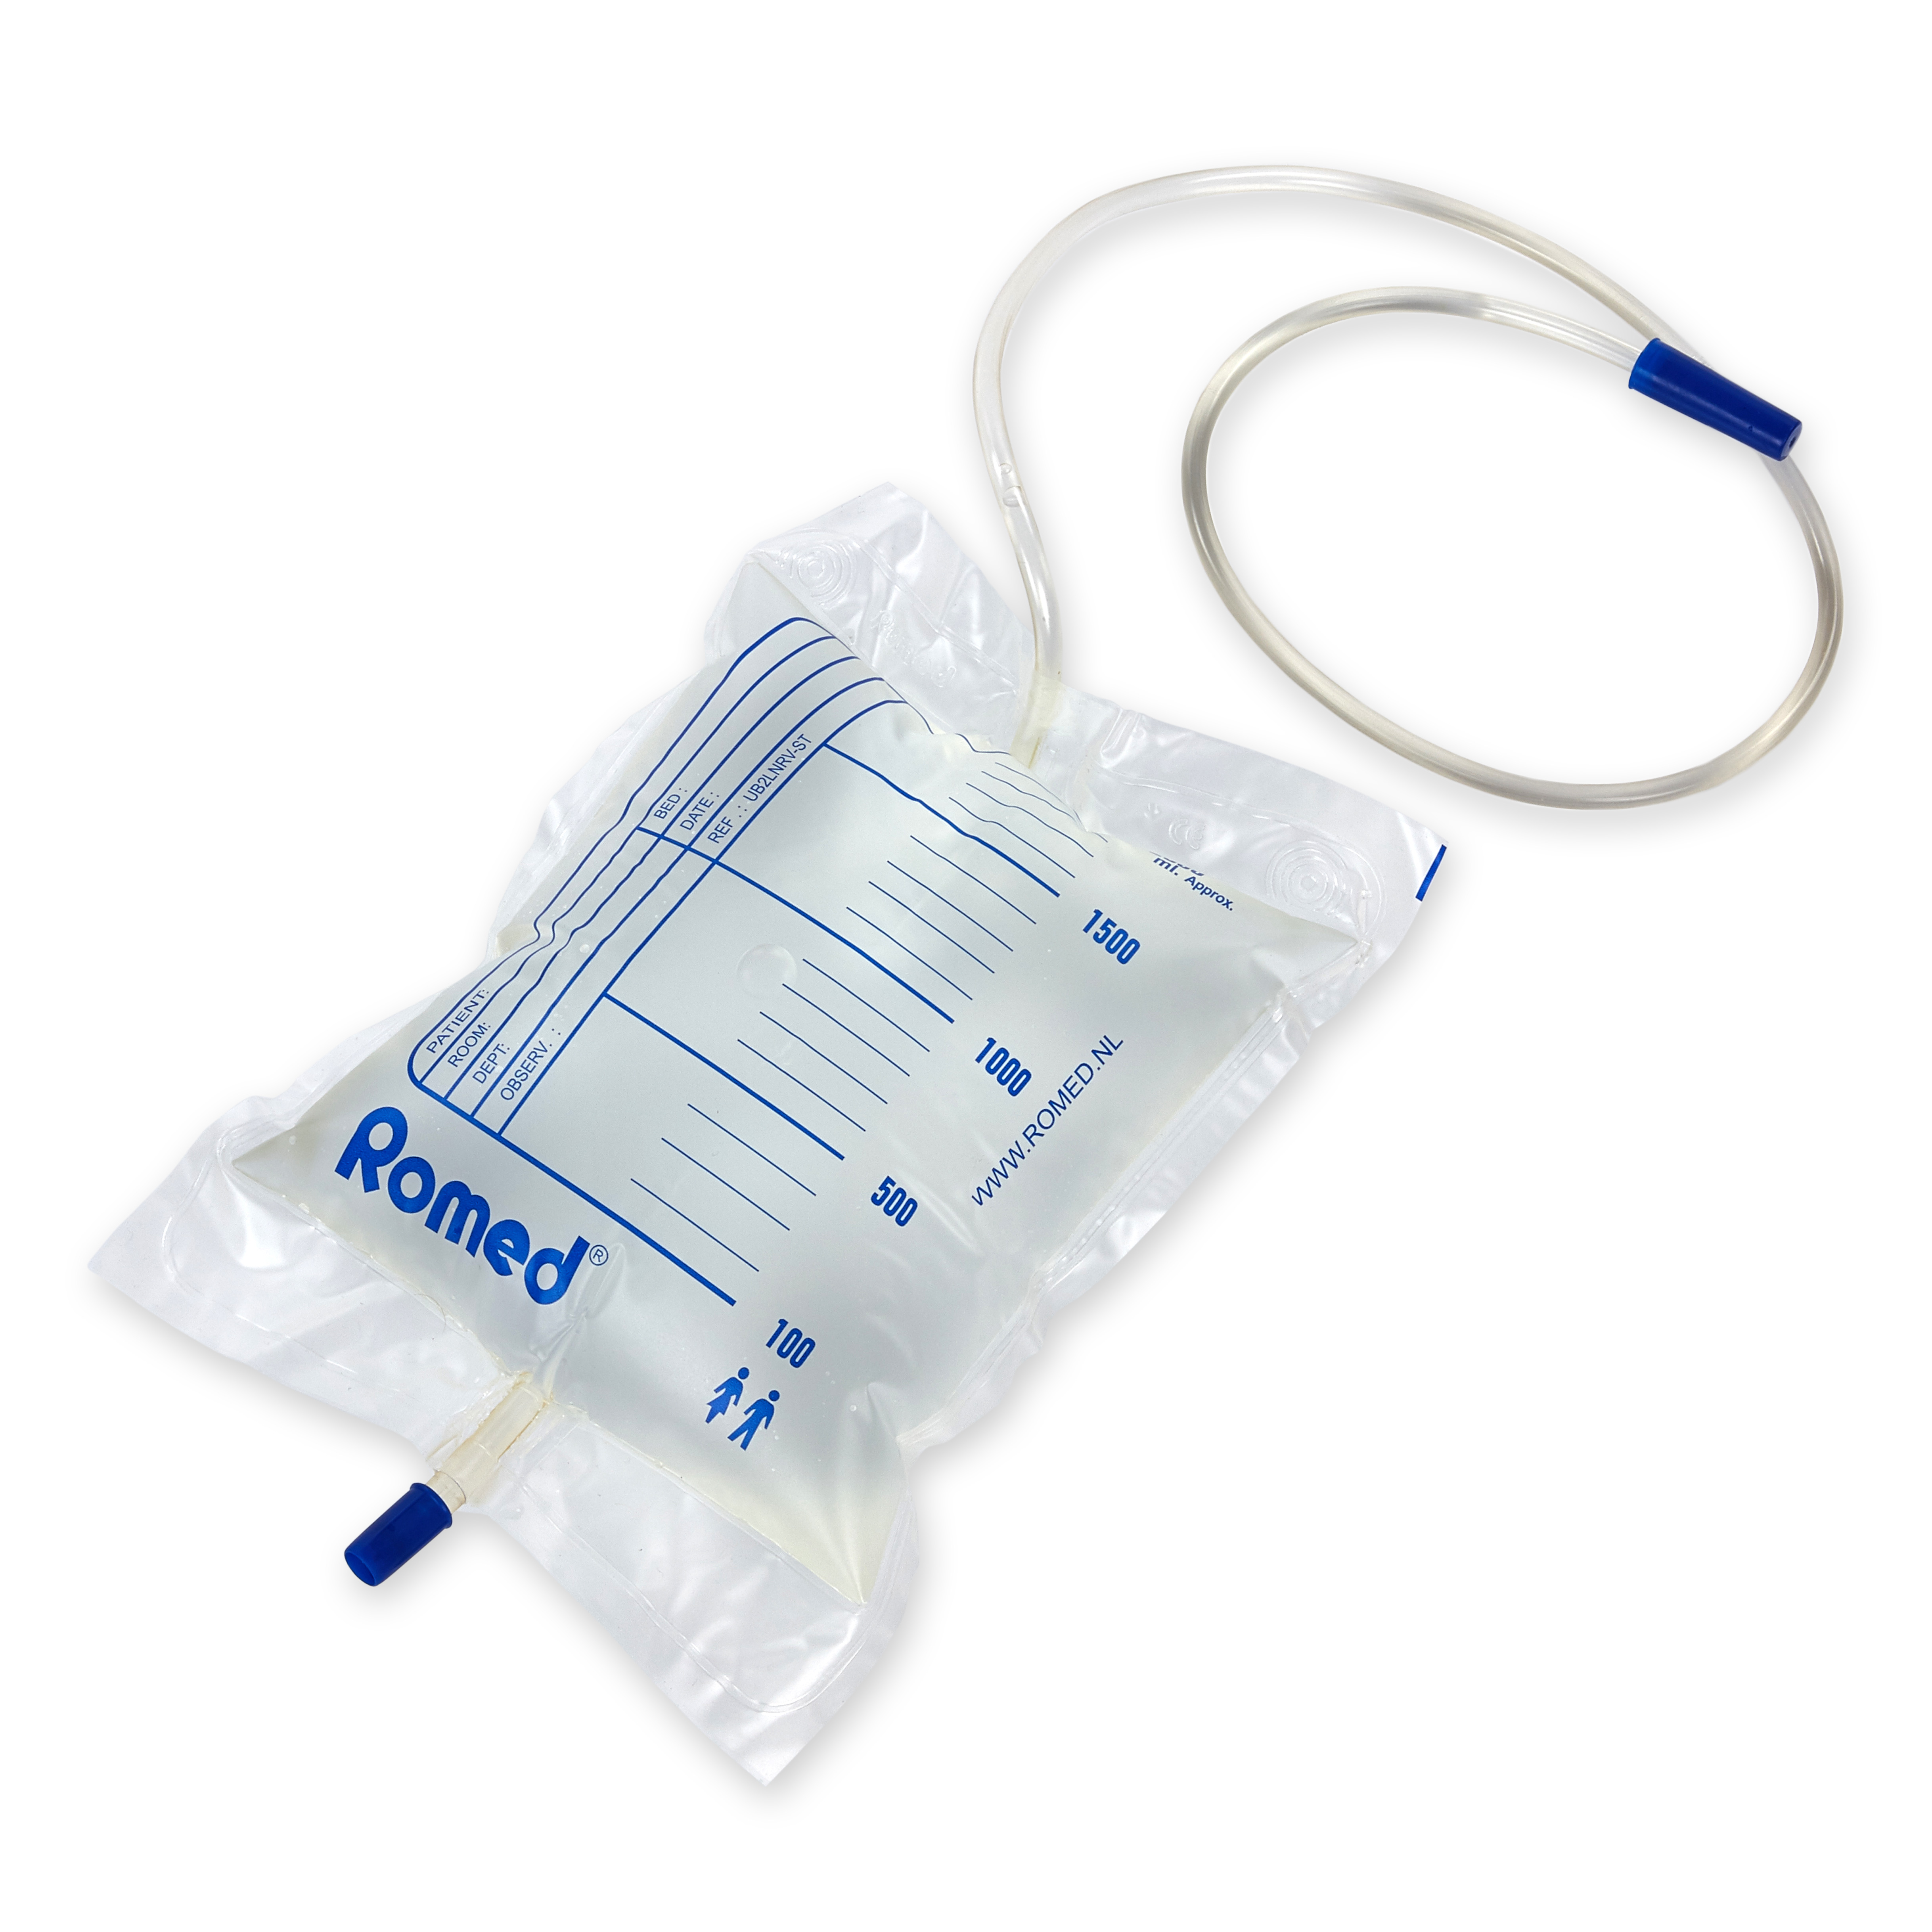 UB2LNRV-ST Romed urine bags 2 litres, with non return valve and bottom outlet, 90cm tube, sterile per piece in a polybag, 10 pieces in a bigger polybag, 250 pcs in a carton.